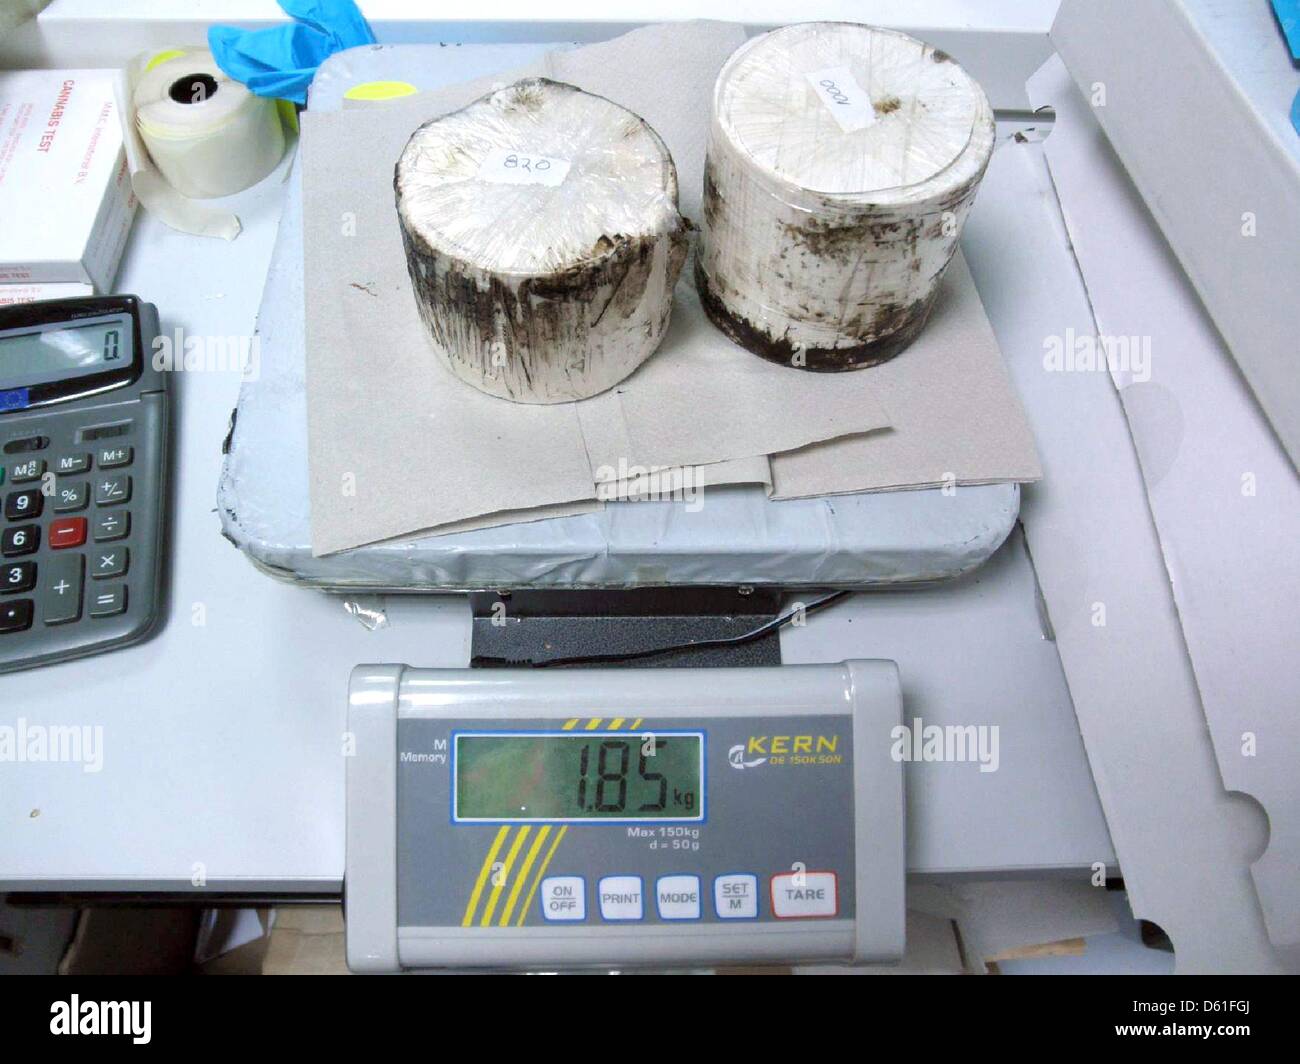 (HANDOUT) An undated handout shows 1.8 kilograms of drugs discovered by customs officers at the Leipzig/Halle airport in Leipzig, Germany. The cocaine was found when officers took apart a winch packed as air freight, according to the chief customs office in Dresden on Friday, 20 April 2012 Photo: Hauptzollamt Dresden (Dresden Chief Customs Office) Stock Photo